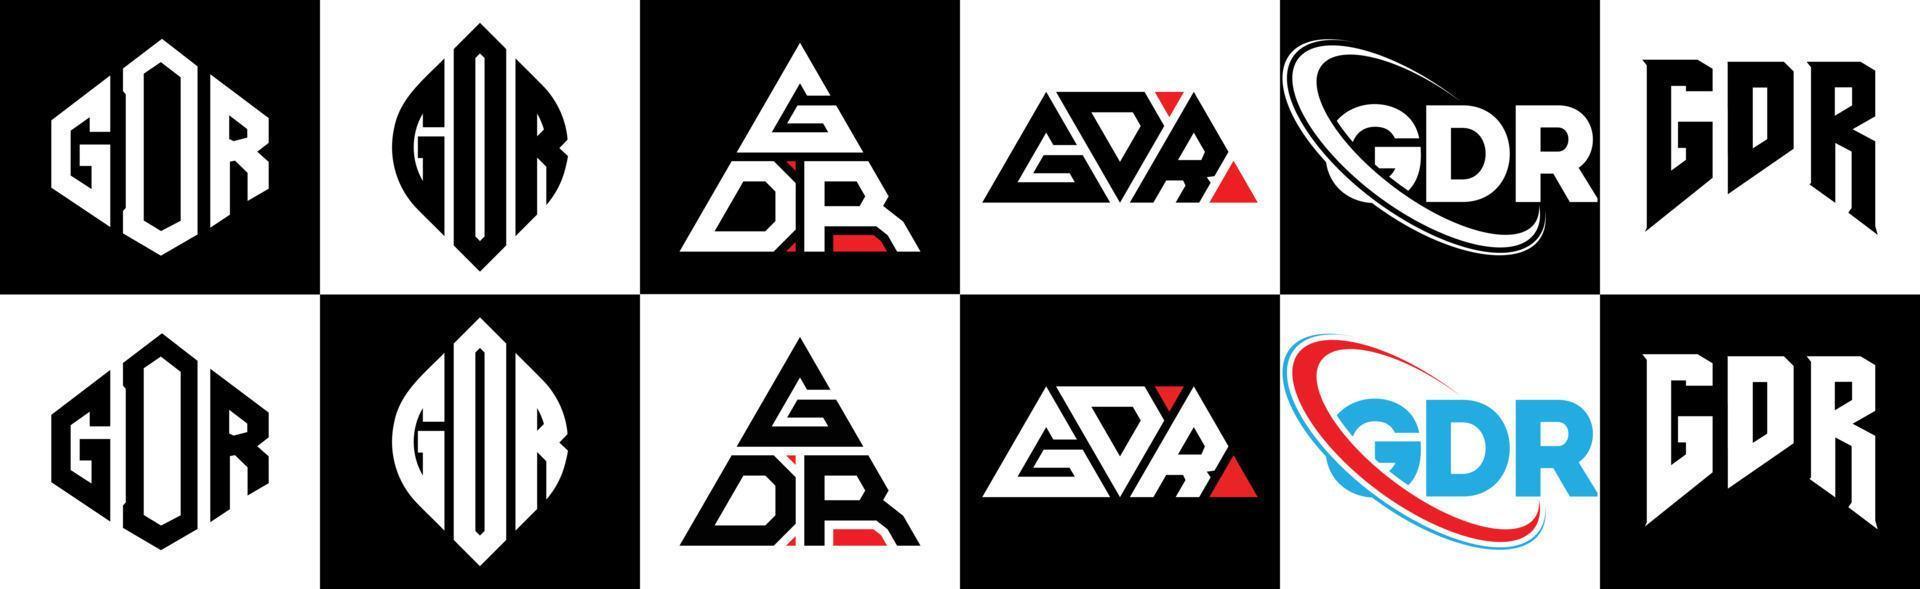 GDR letter logo design in six style. GDR polygon, circle, triangle, hexagon, flat and simple style with black and white color variation letter logo set in one artboard. GDR minimalist and classic logo vector